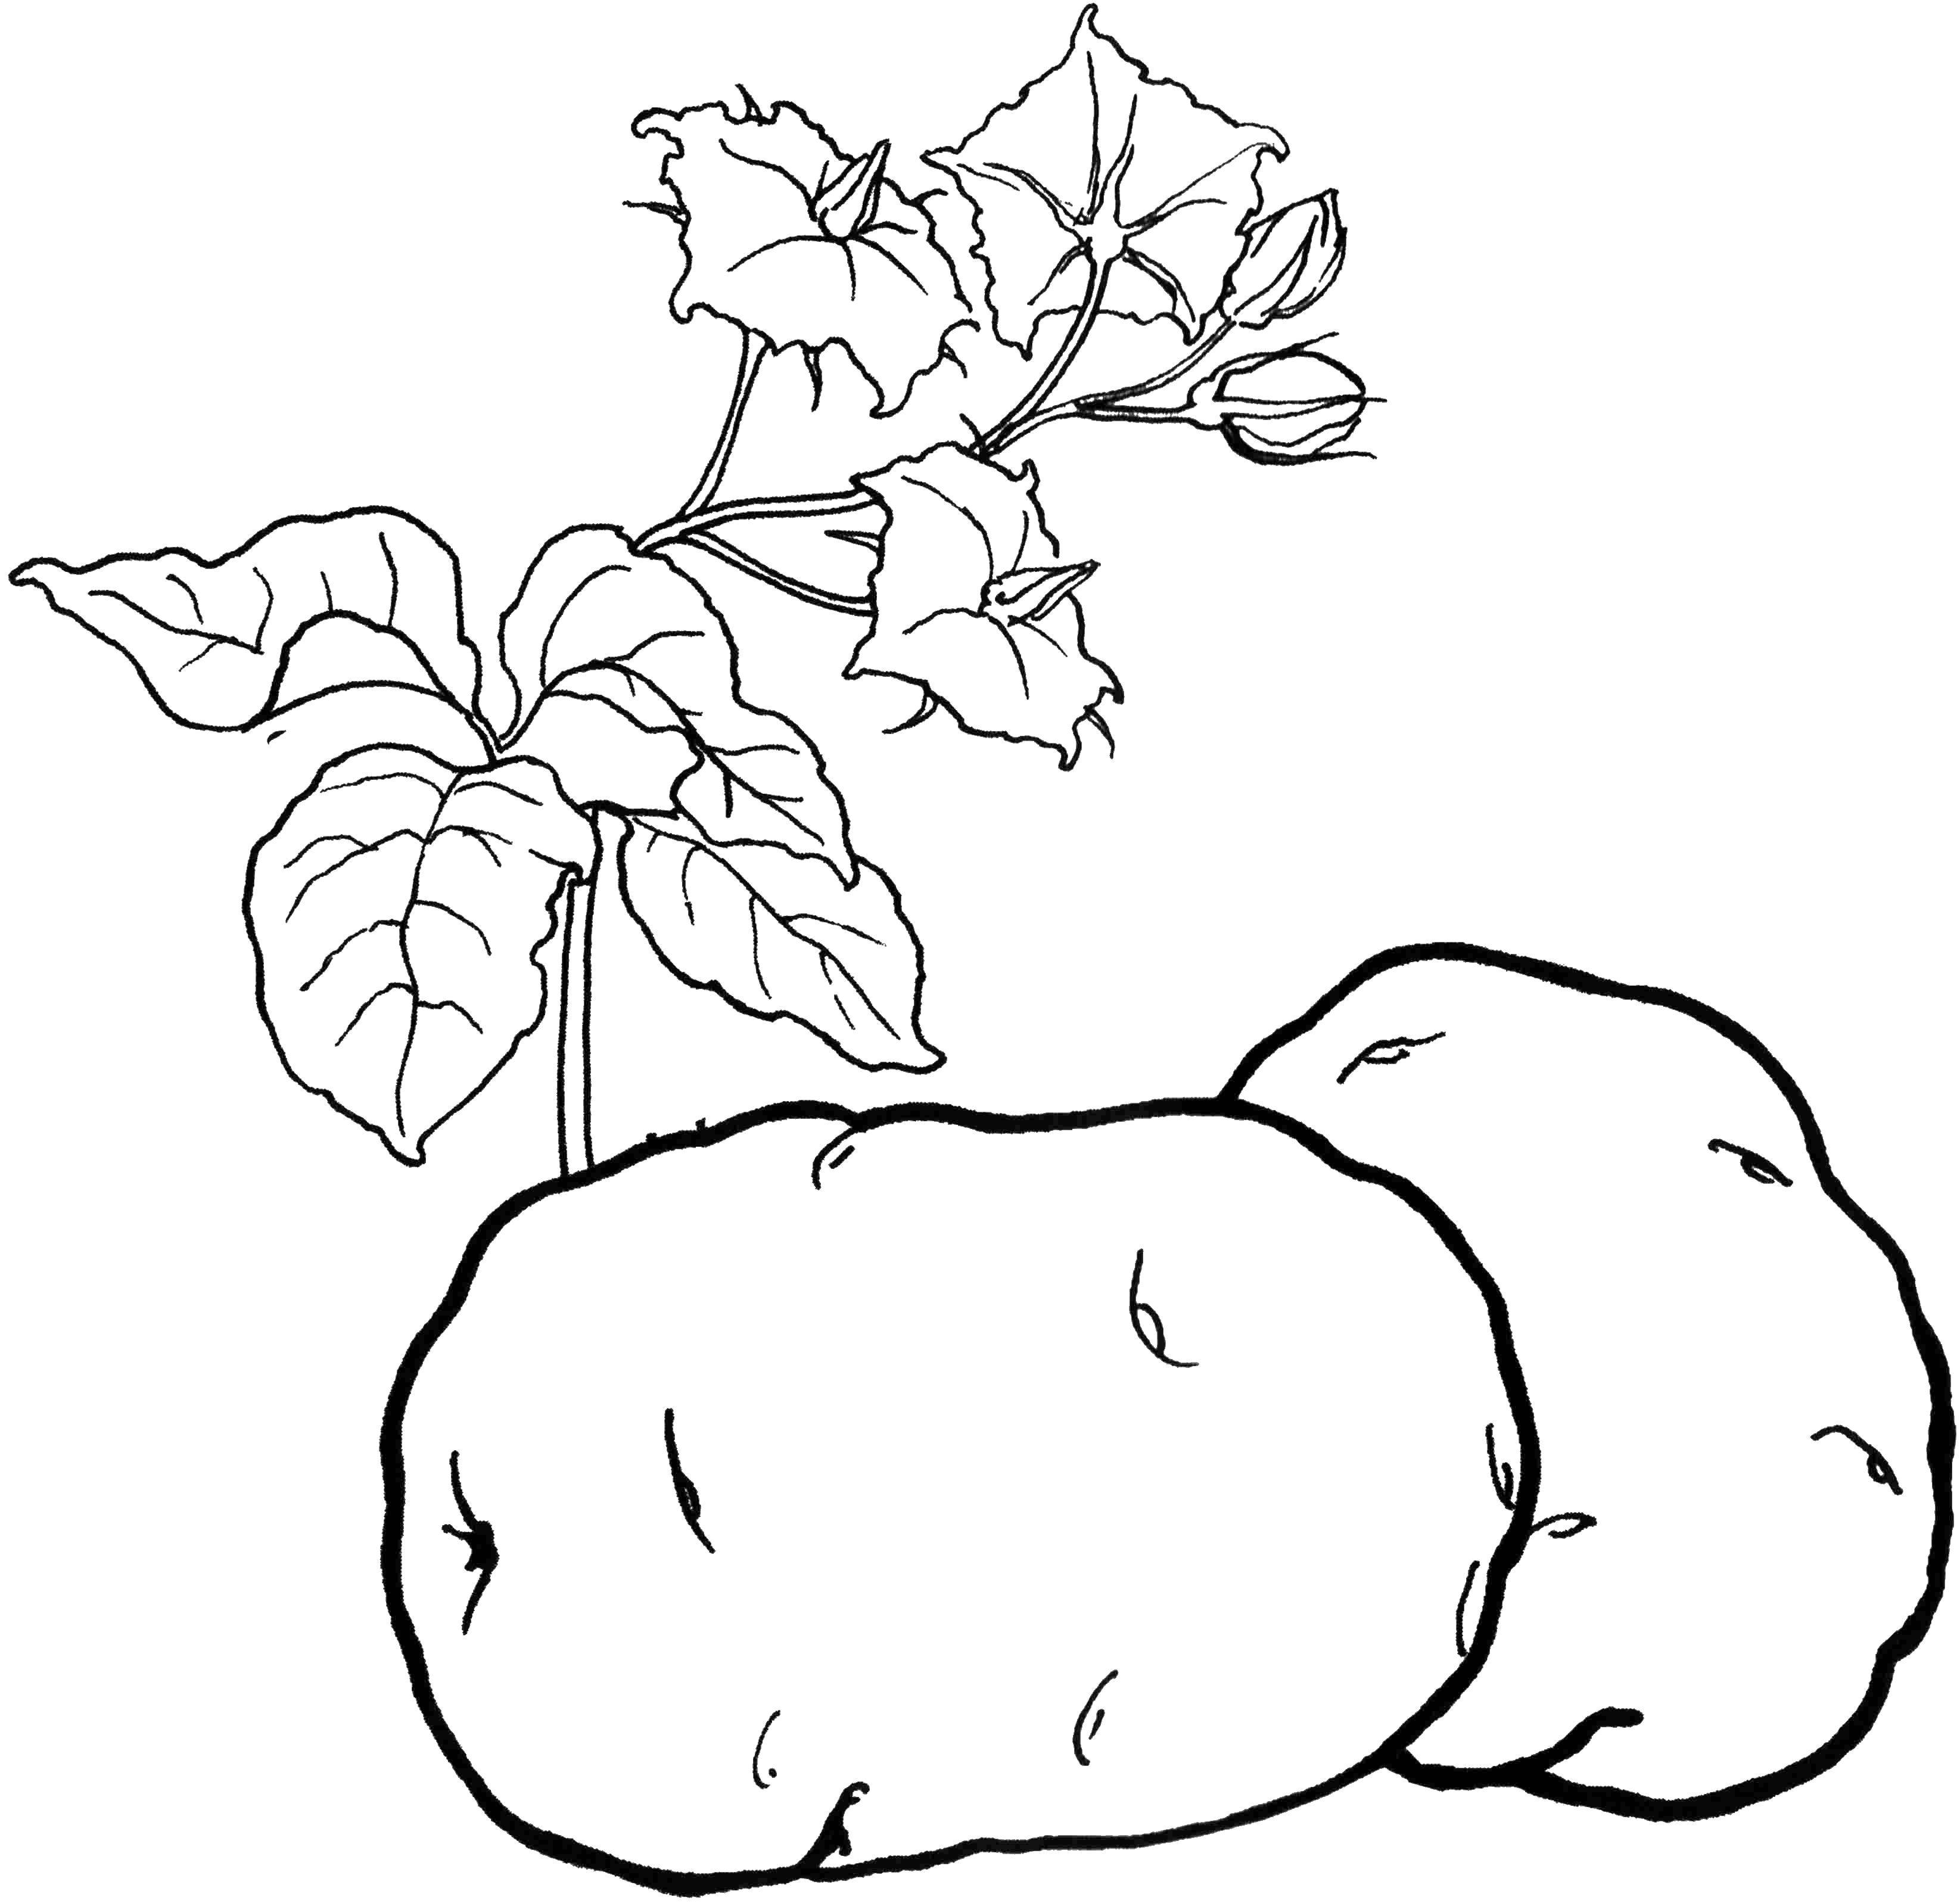 Coloring Potatoes. Category vegetables. Tags:  Vegetables.